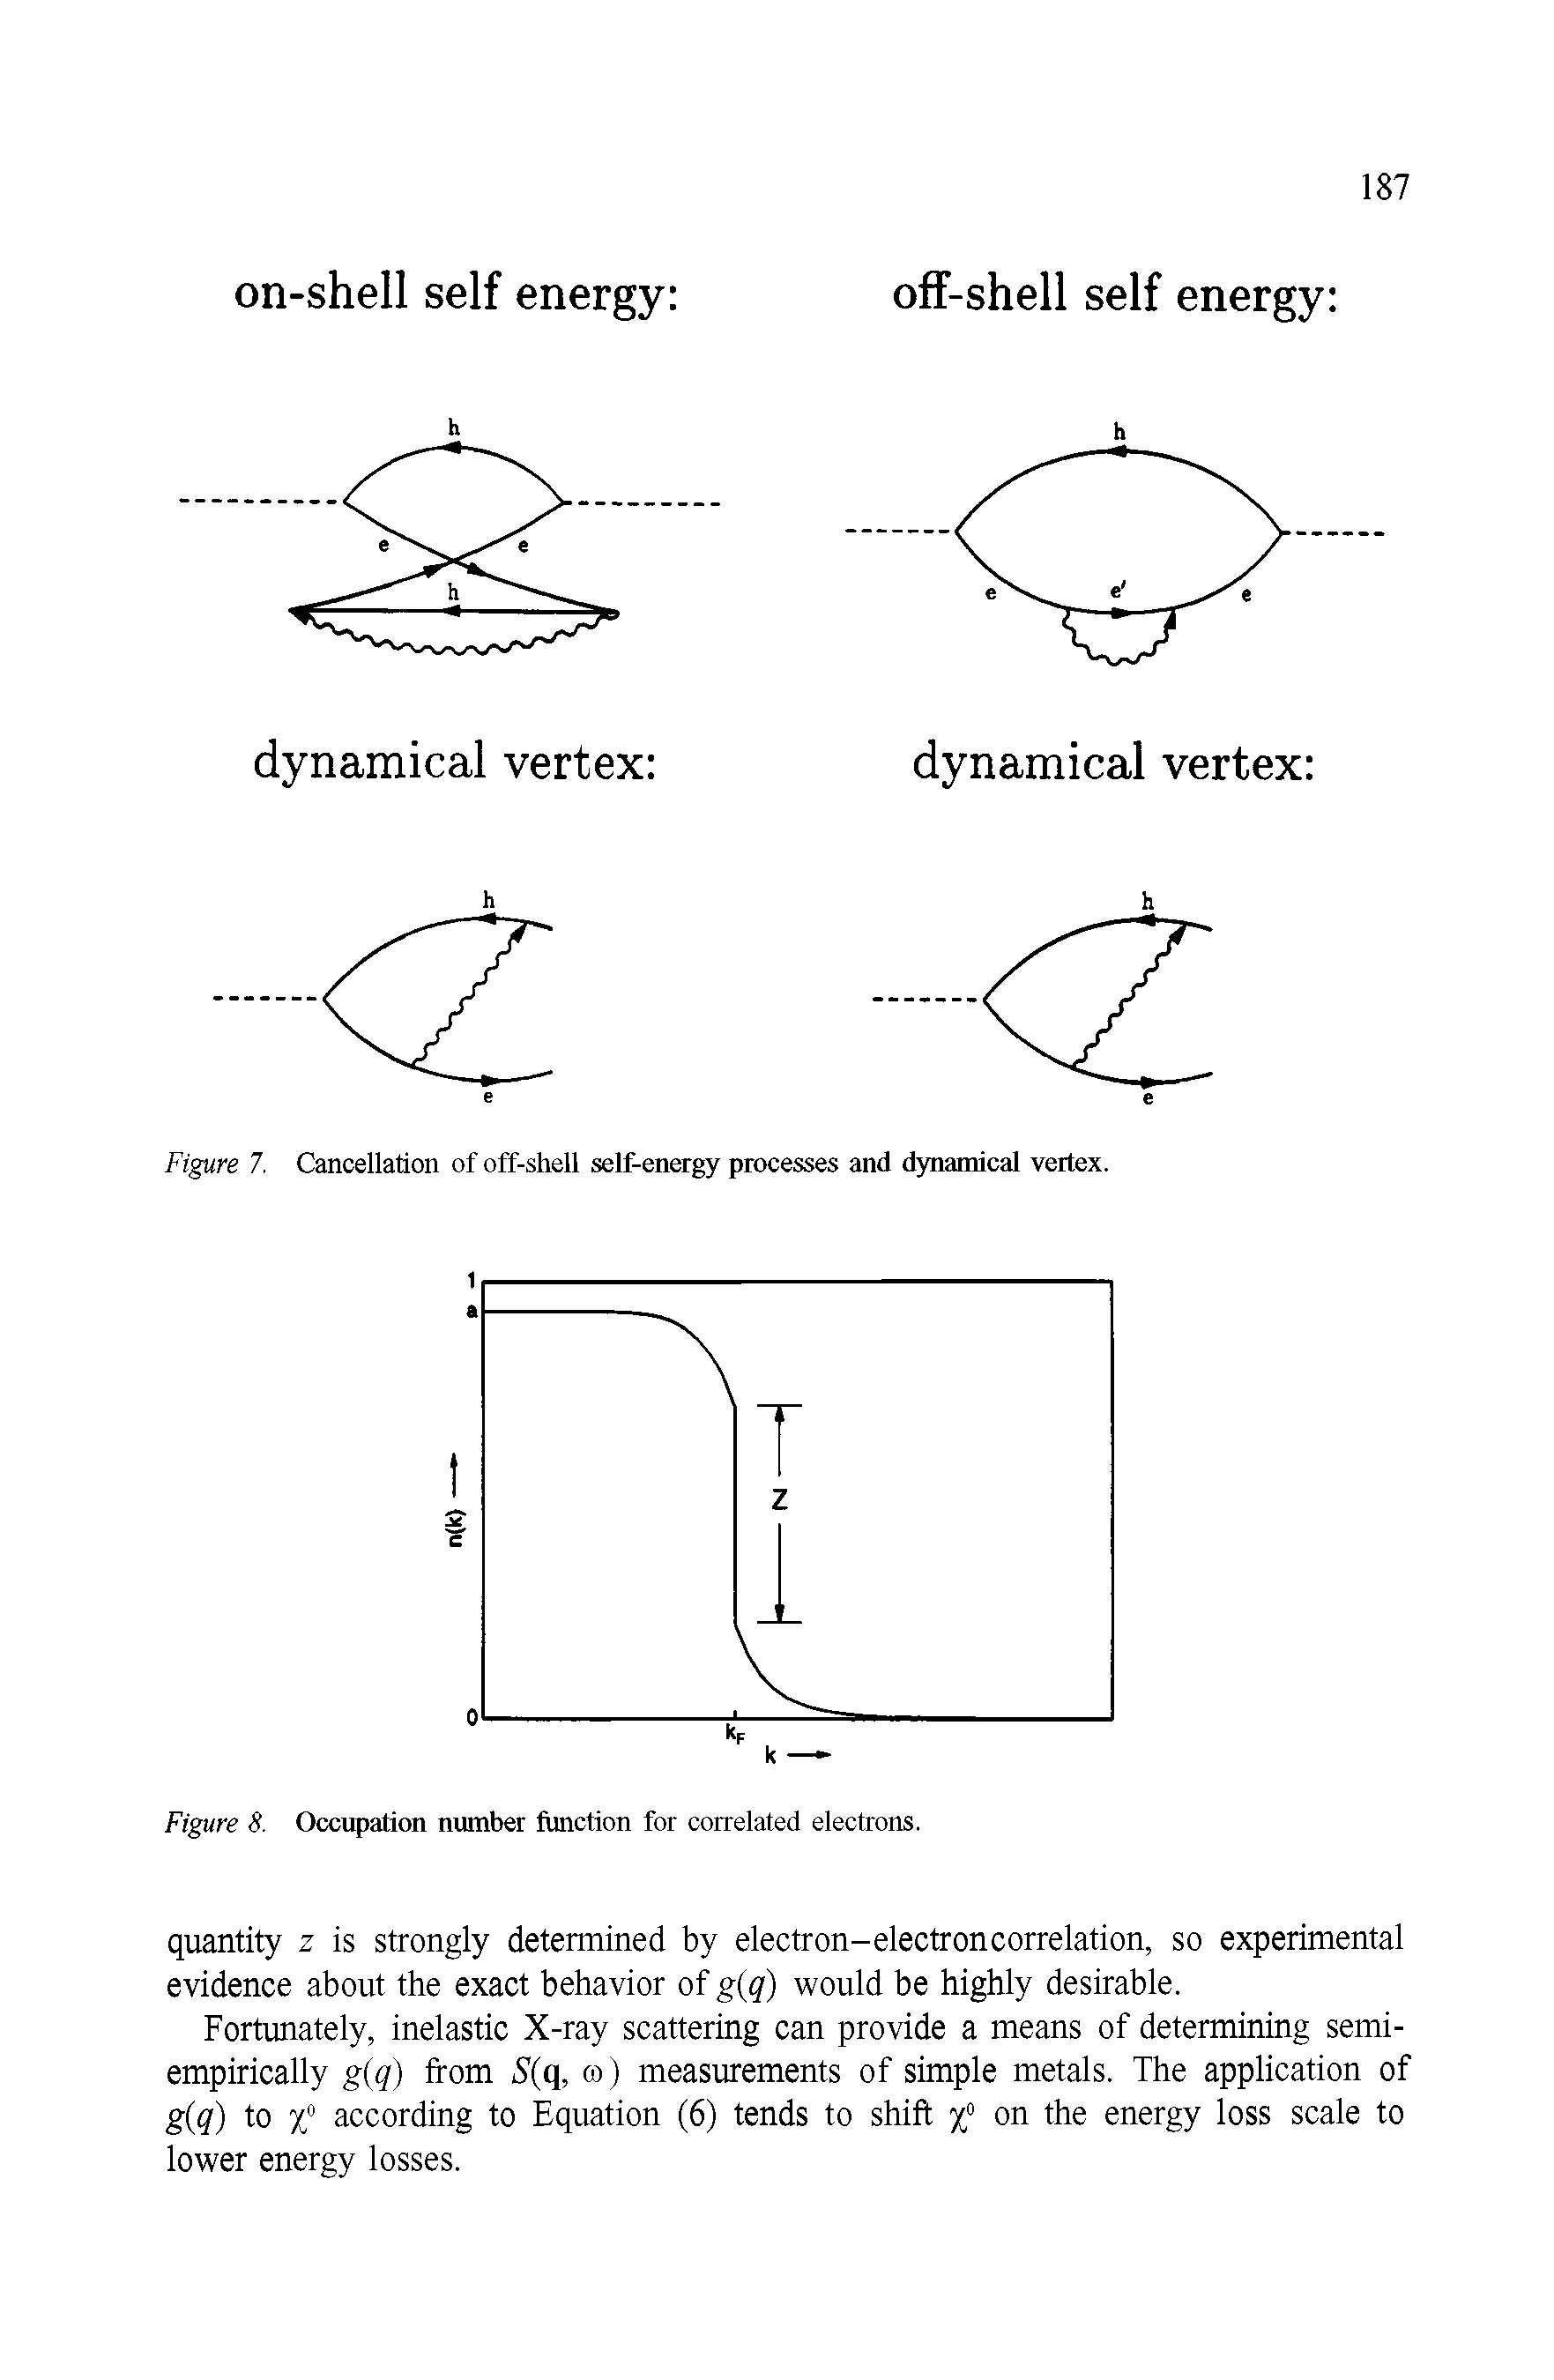 Figure 8. Occupation number function for correlated electrons.